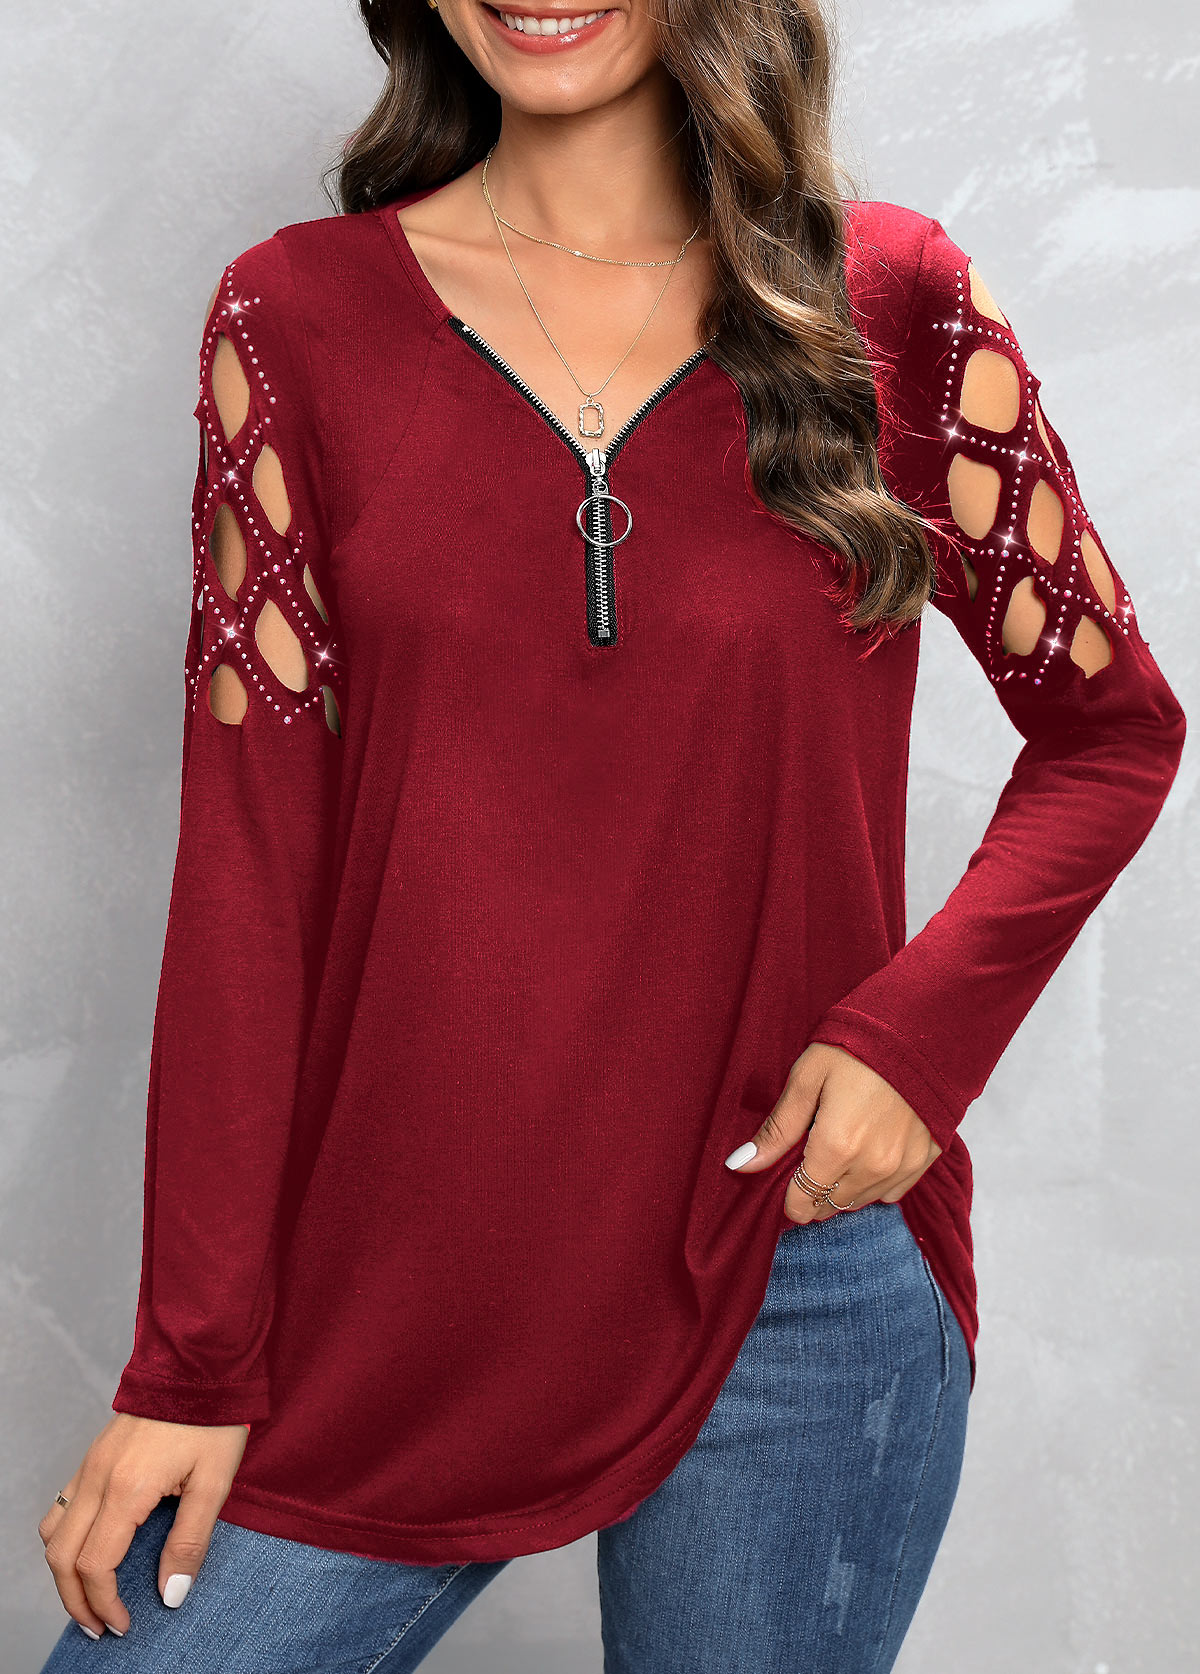 Wine Red Hot Drilling Long Sleeve T Shirt